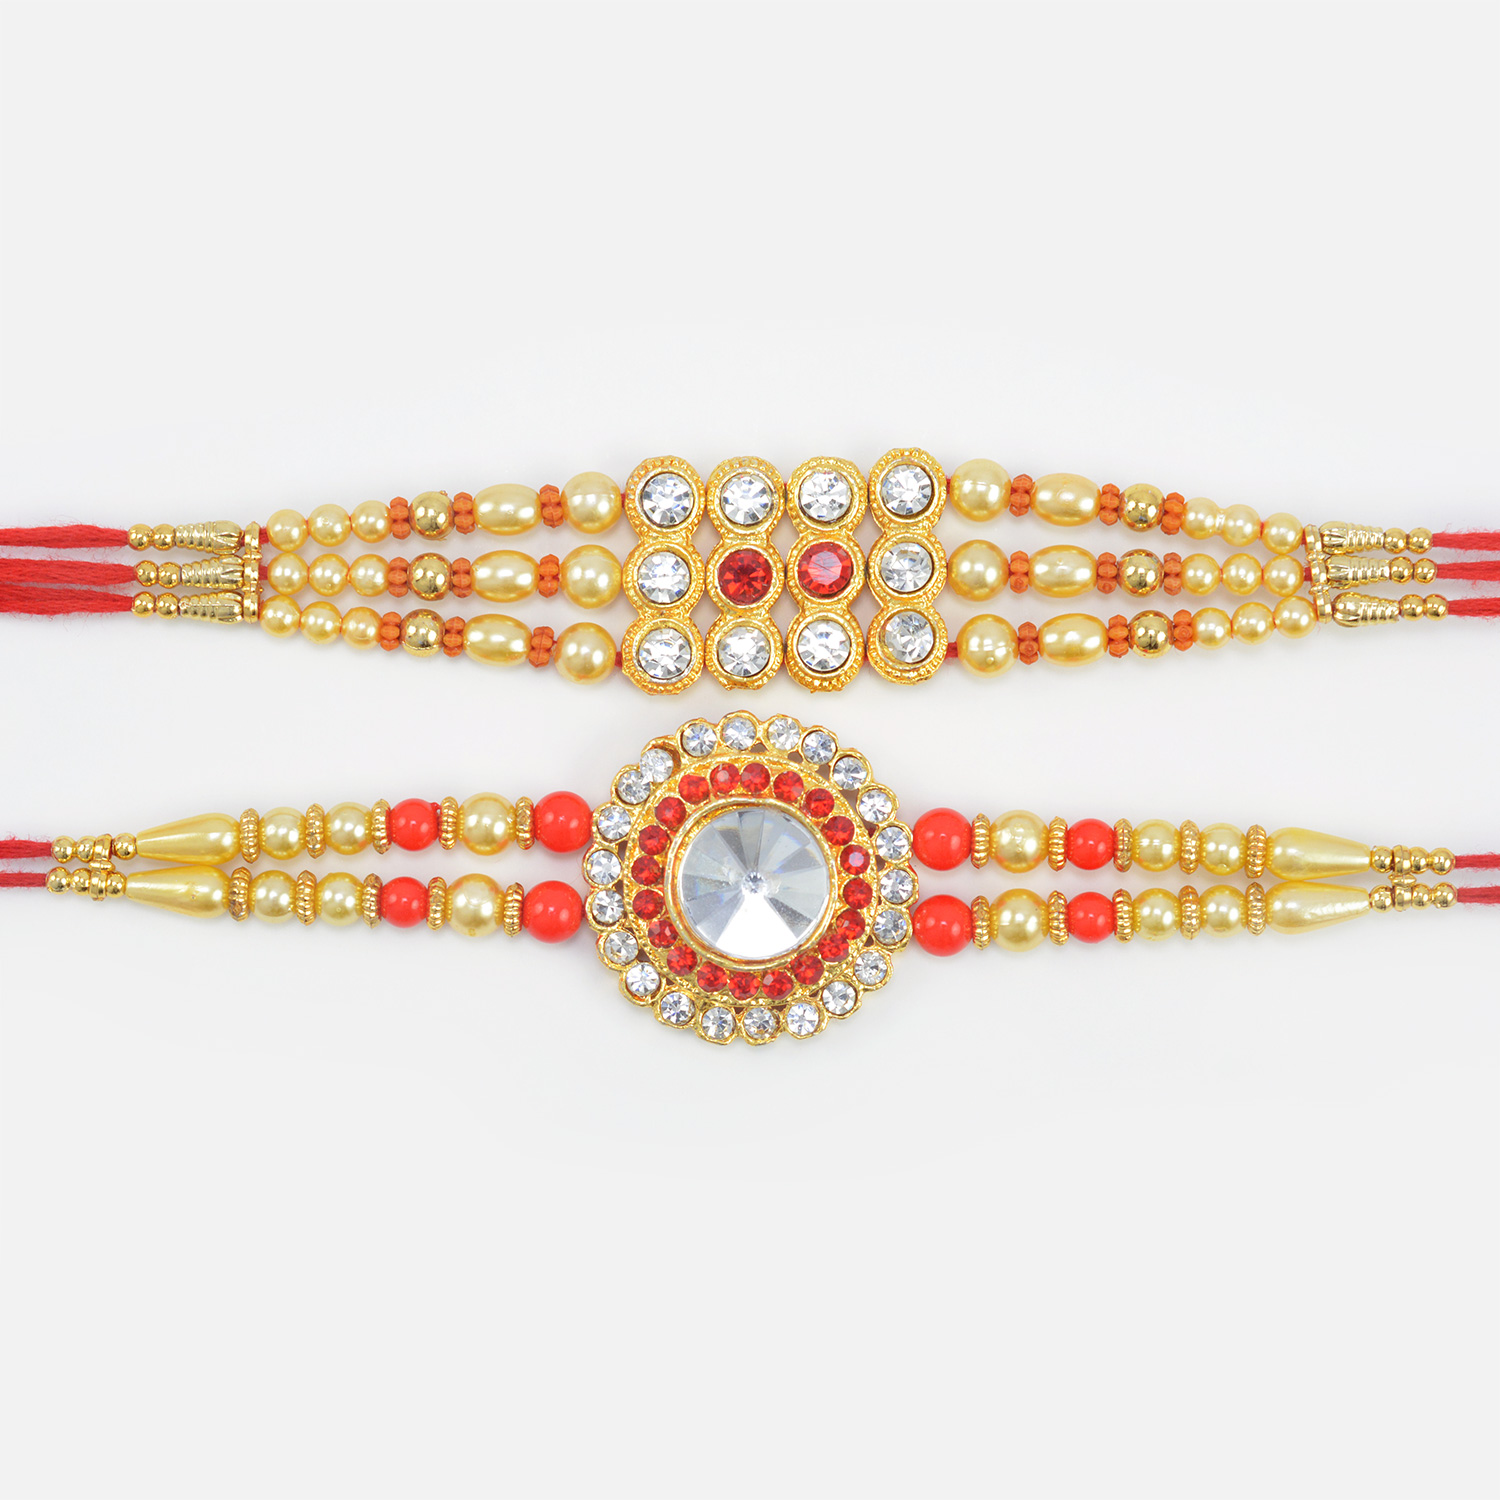 Tri Liner and Big Diamond in Mid Two Marvelous Rakhi Set of 2